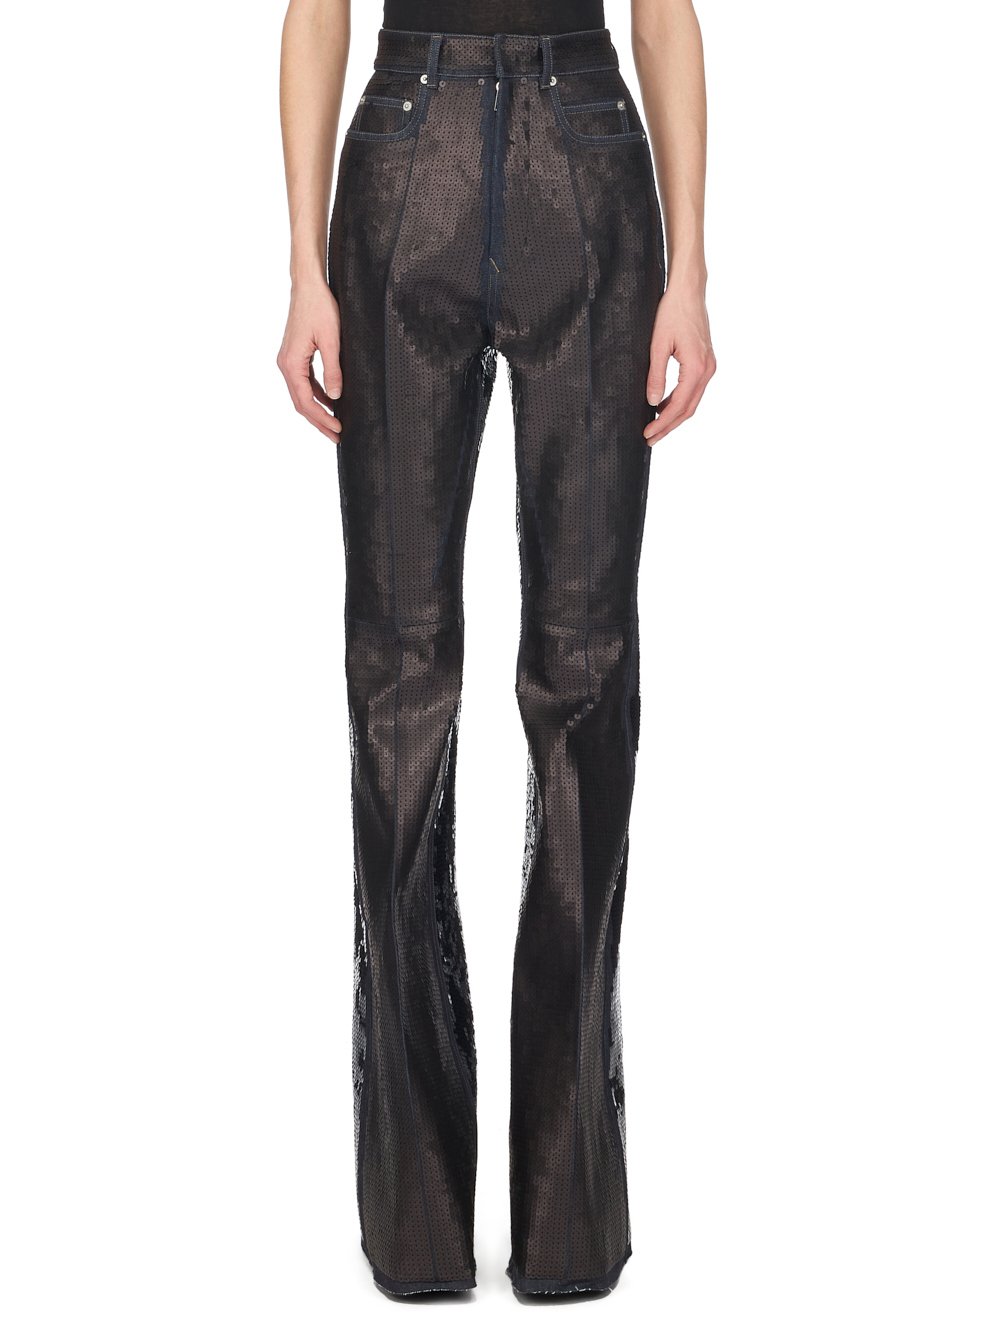 RICK OWENS FW23 LUXOR RUNWAY BOLAN BOOTCUT IN BLUE AND BLACK SEQUIN EMBROIDERED STRETCH DENIM